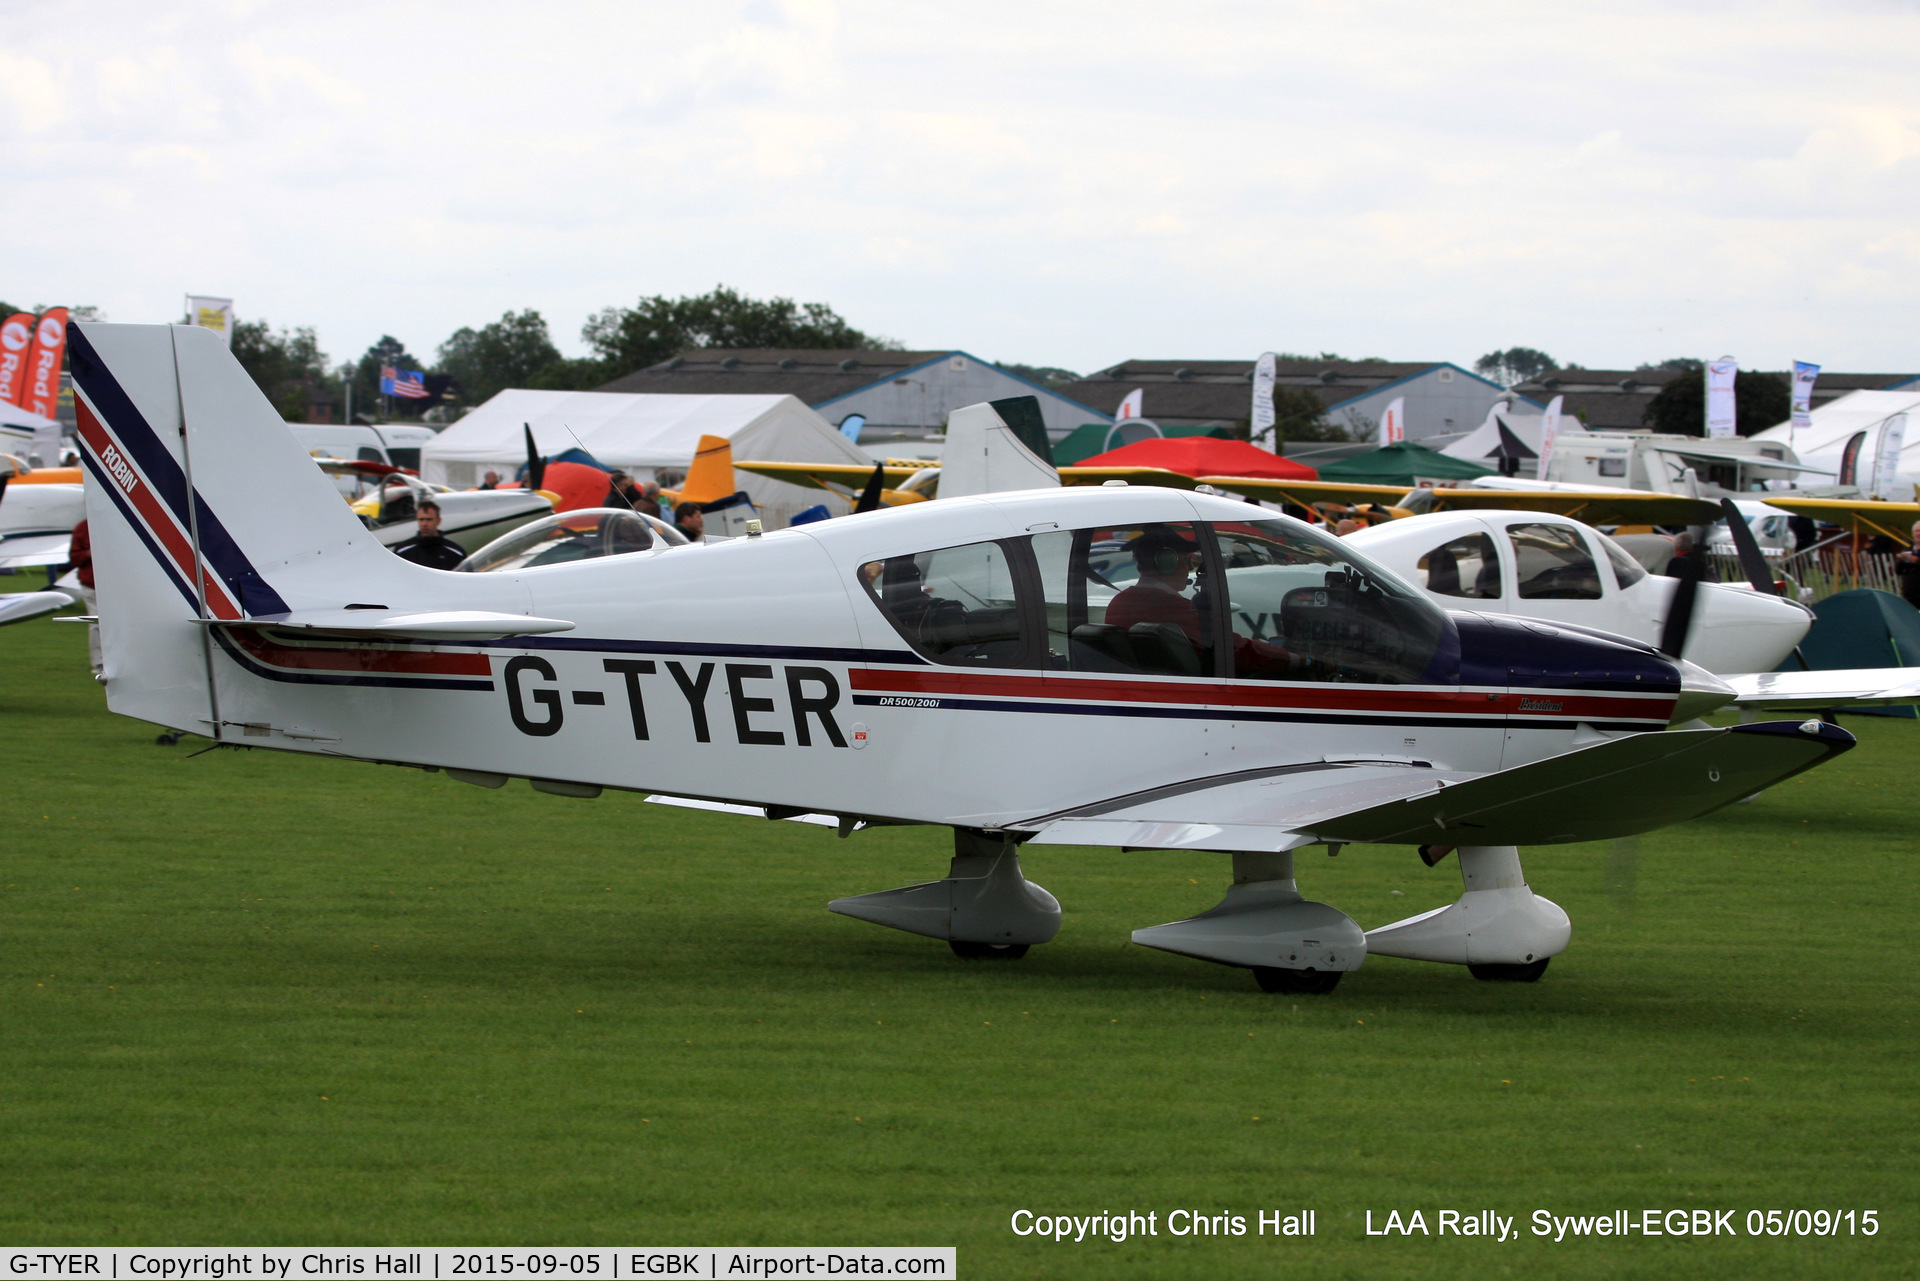 G-TYER, 2000 Robin DR-400-500 President C/N 21, at the LAA Rally 2015, Sywell